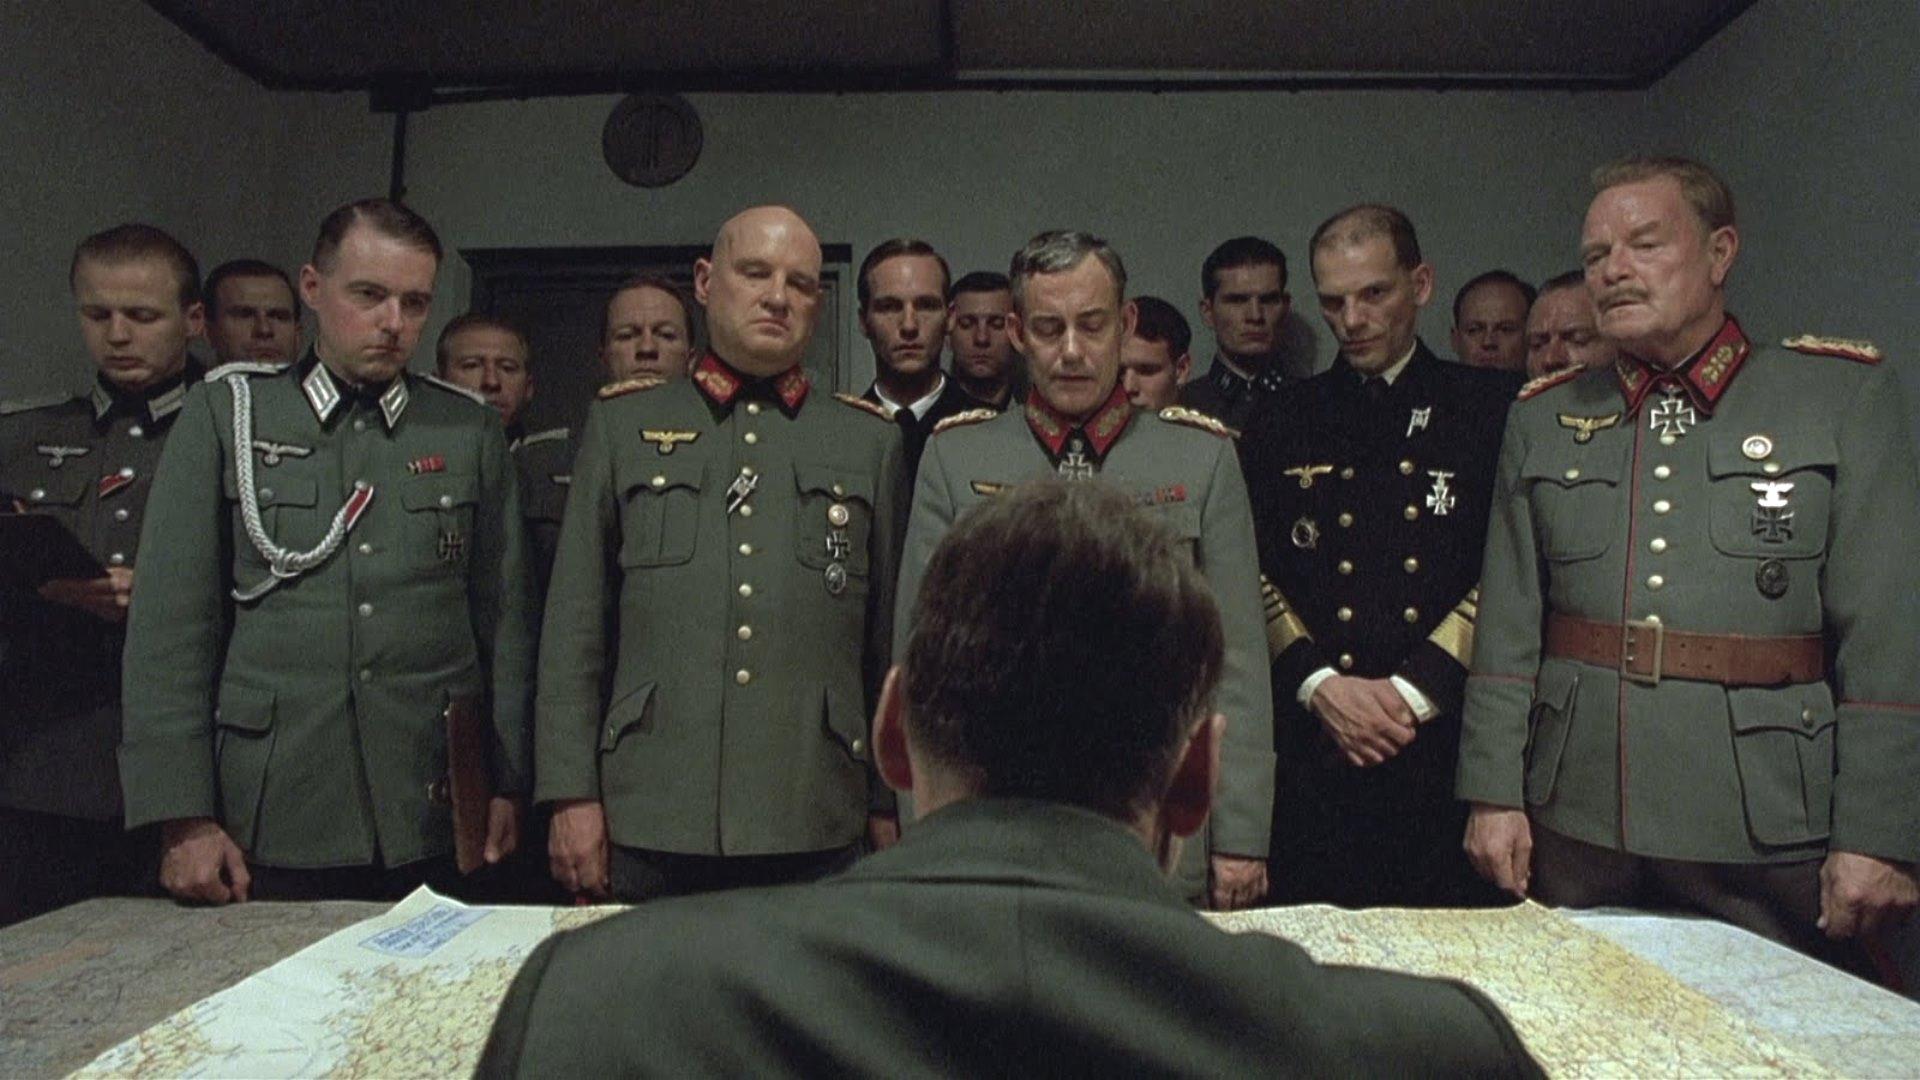 Image gallery for The Downfall: Hitler and the End of the Third Reich -  FilmAffinity